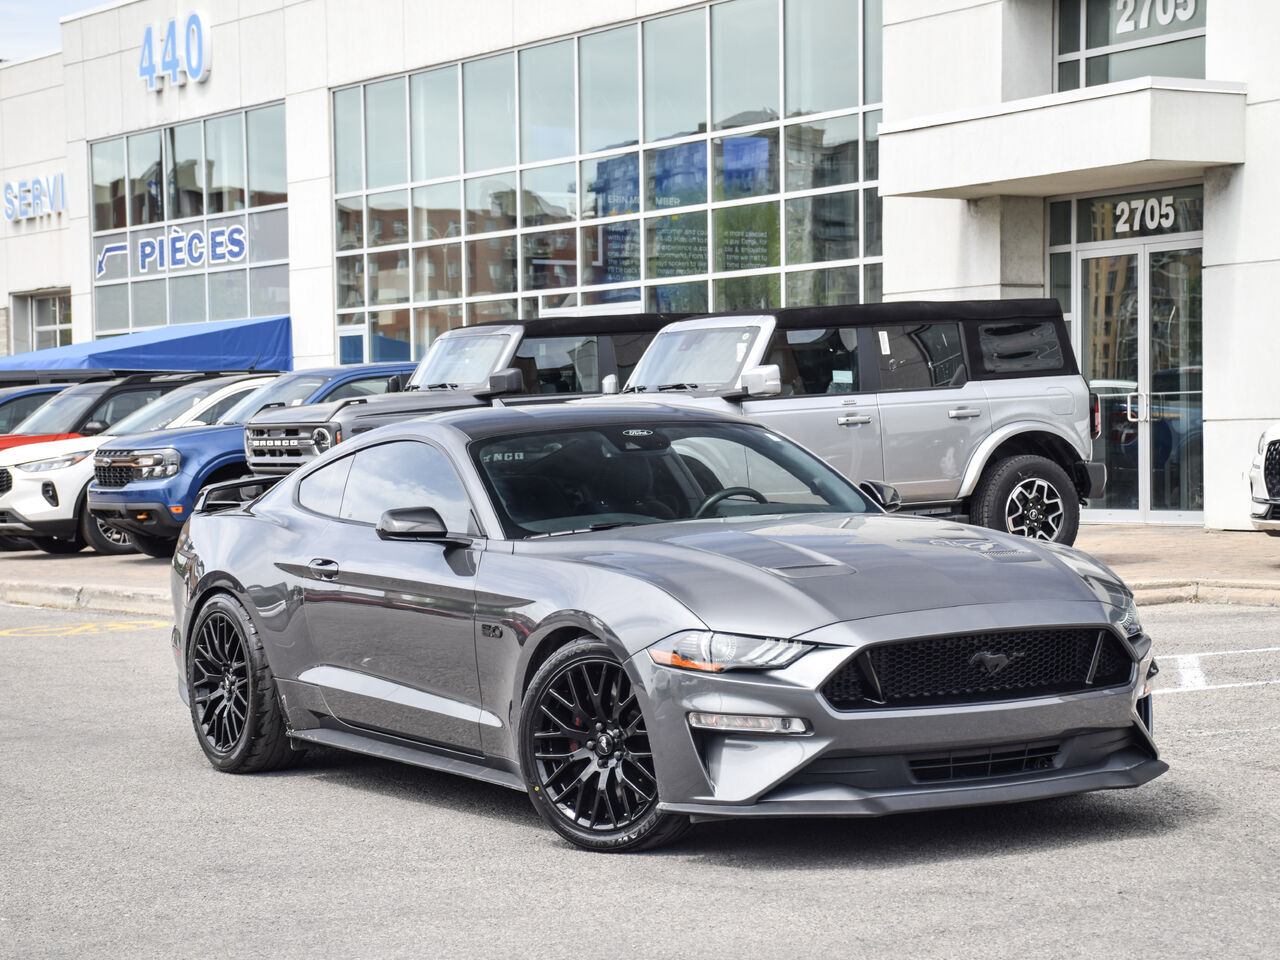 2021 Ford Mustang GT 301A 5.0L V8, MANUELLE, PERFORMANCE